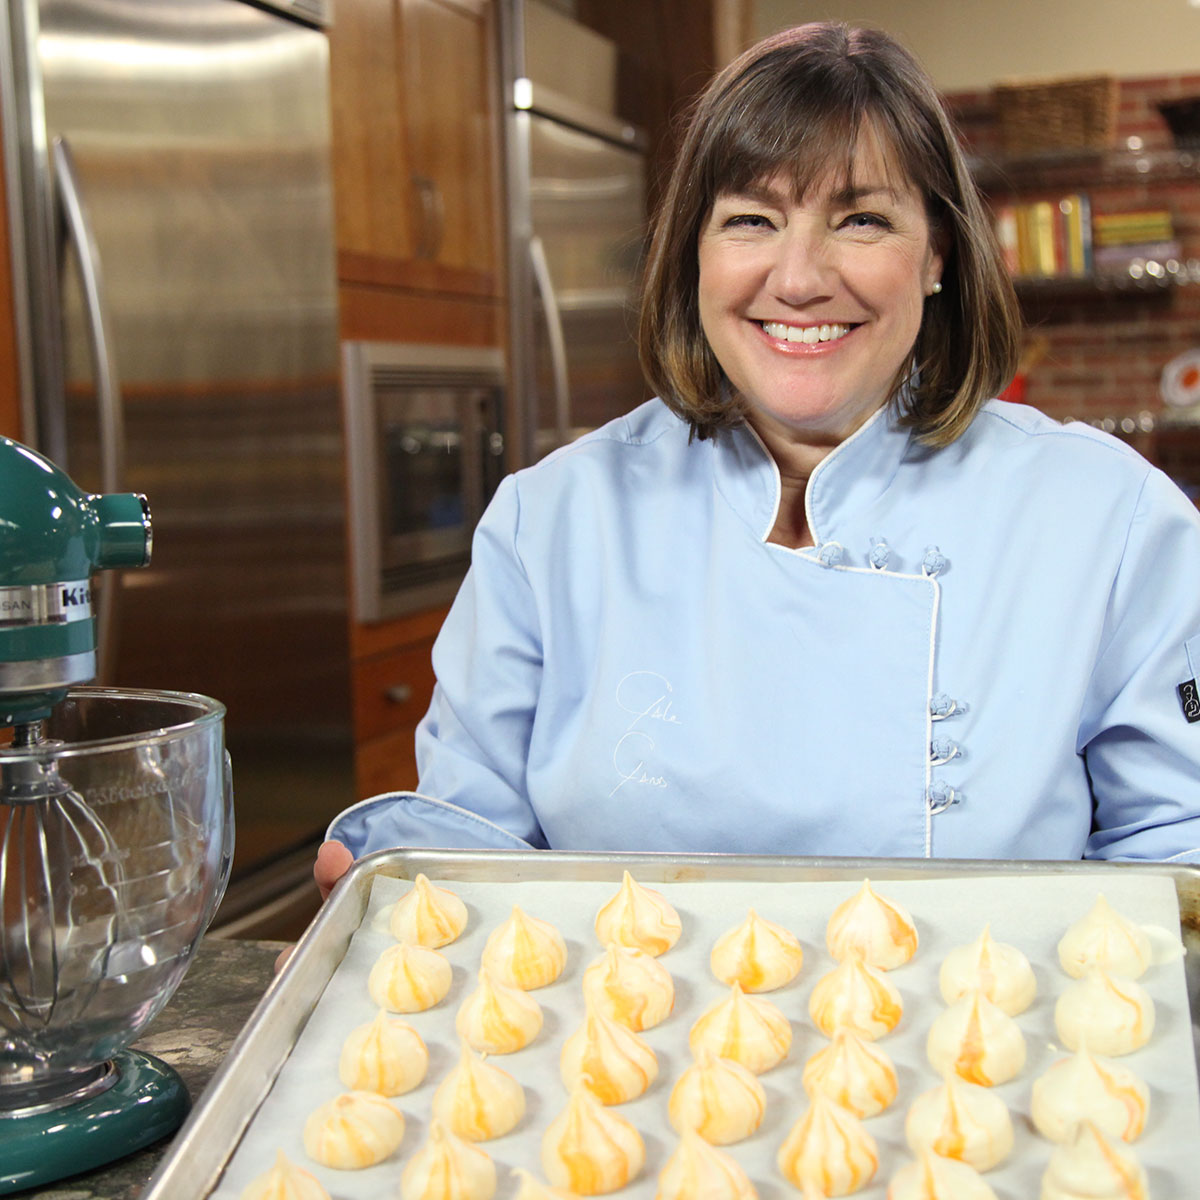 Holiday Desserts with Celebrity Chef Gale Gand at The Joyful Gourmet